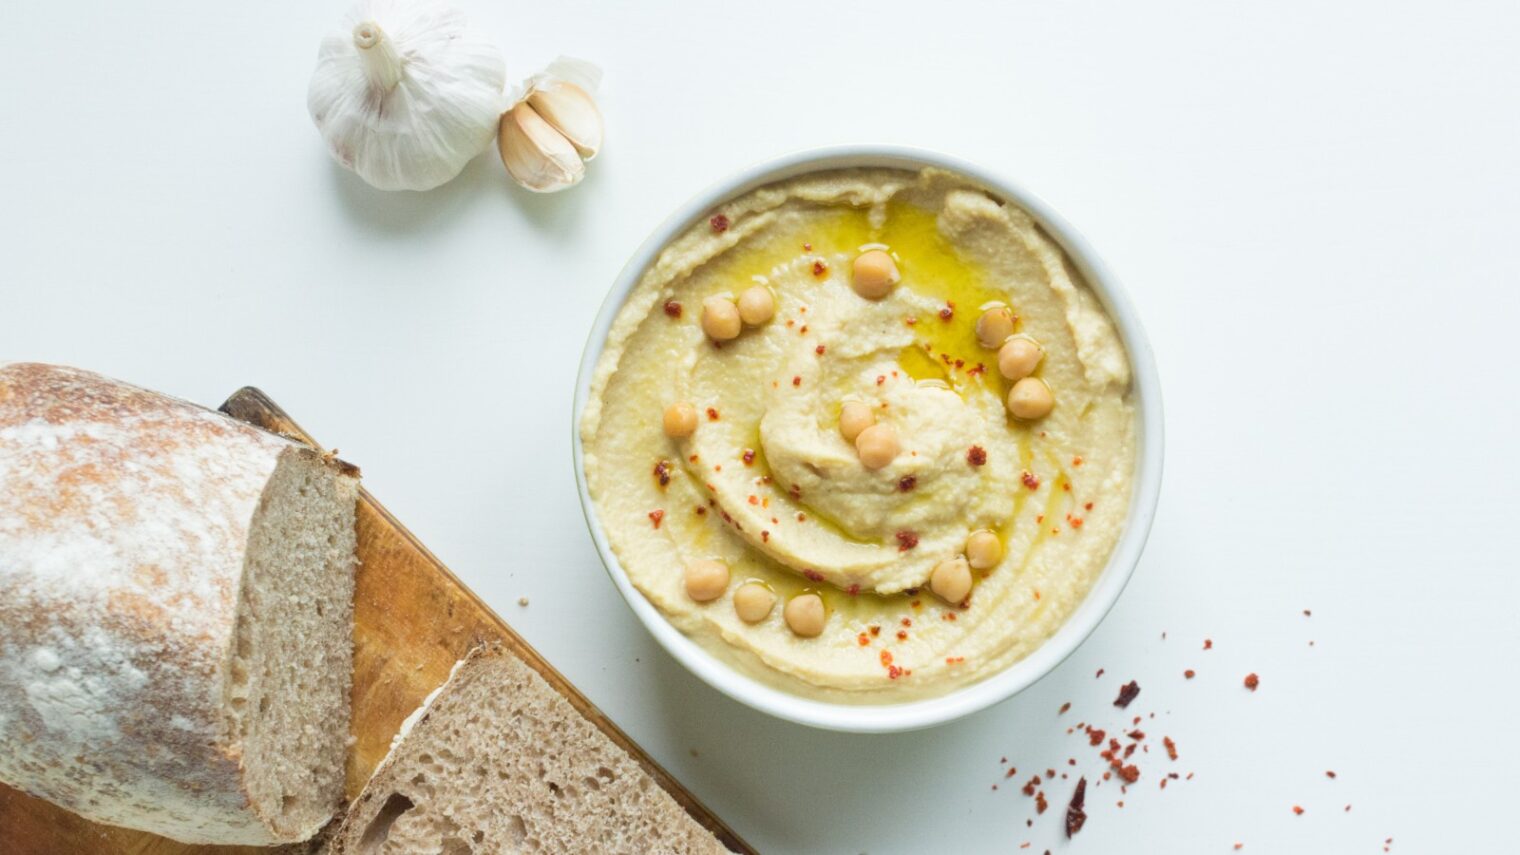 There’s nothing like fresh hummus without preservatives. Photo by Nicholas Barbaros on Unsplash